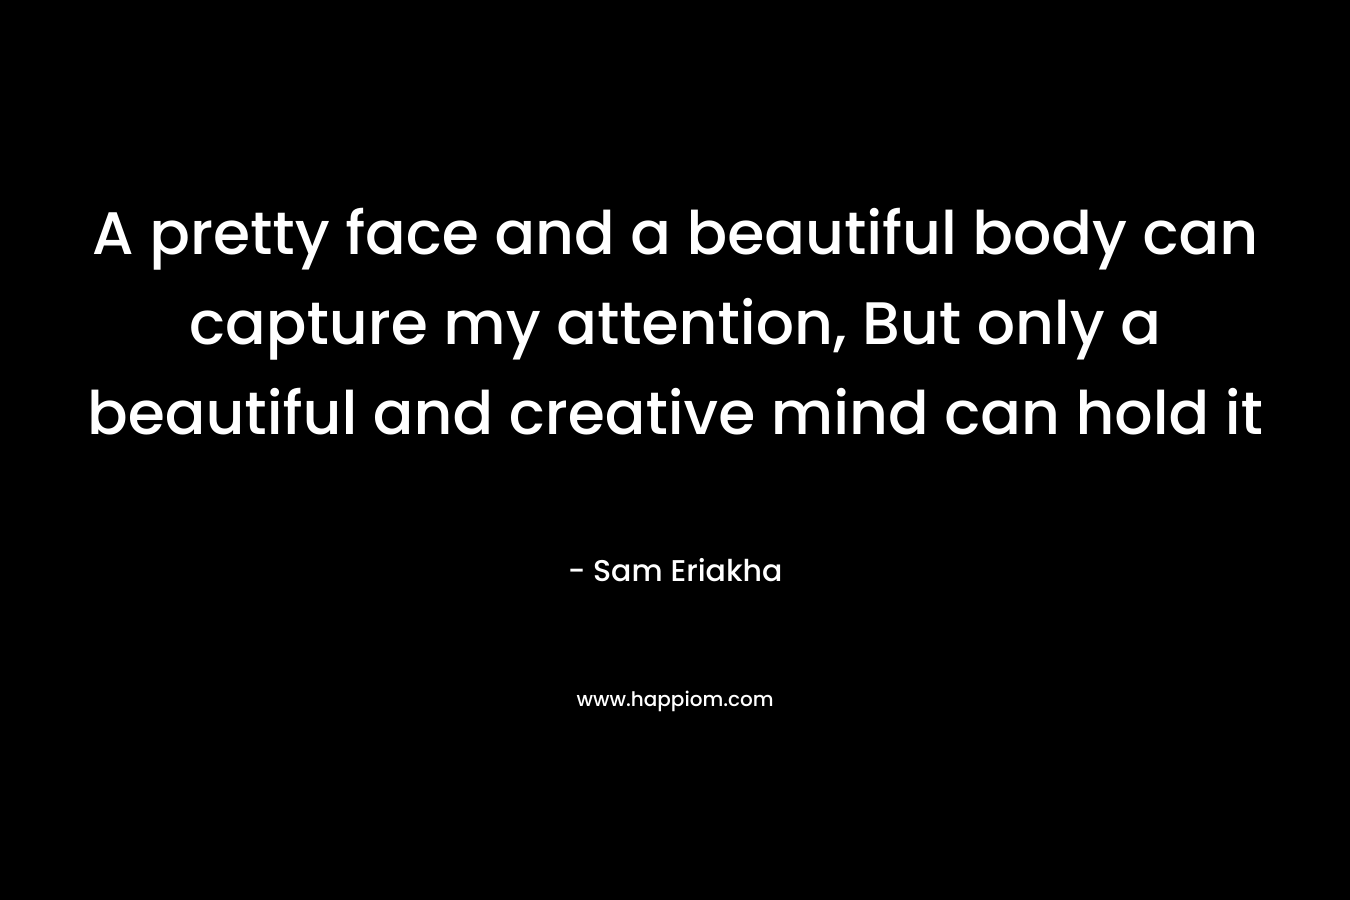 A pretty face and a beautiful body can capture my attention, But only a beautiful and creative mind can hold it